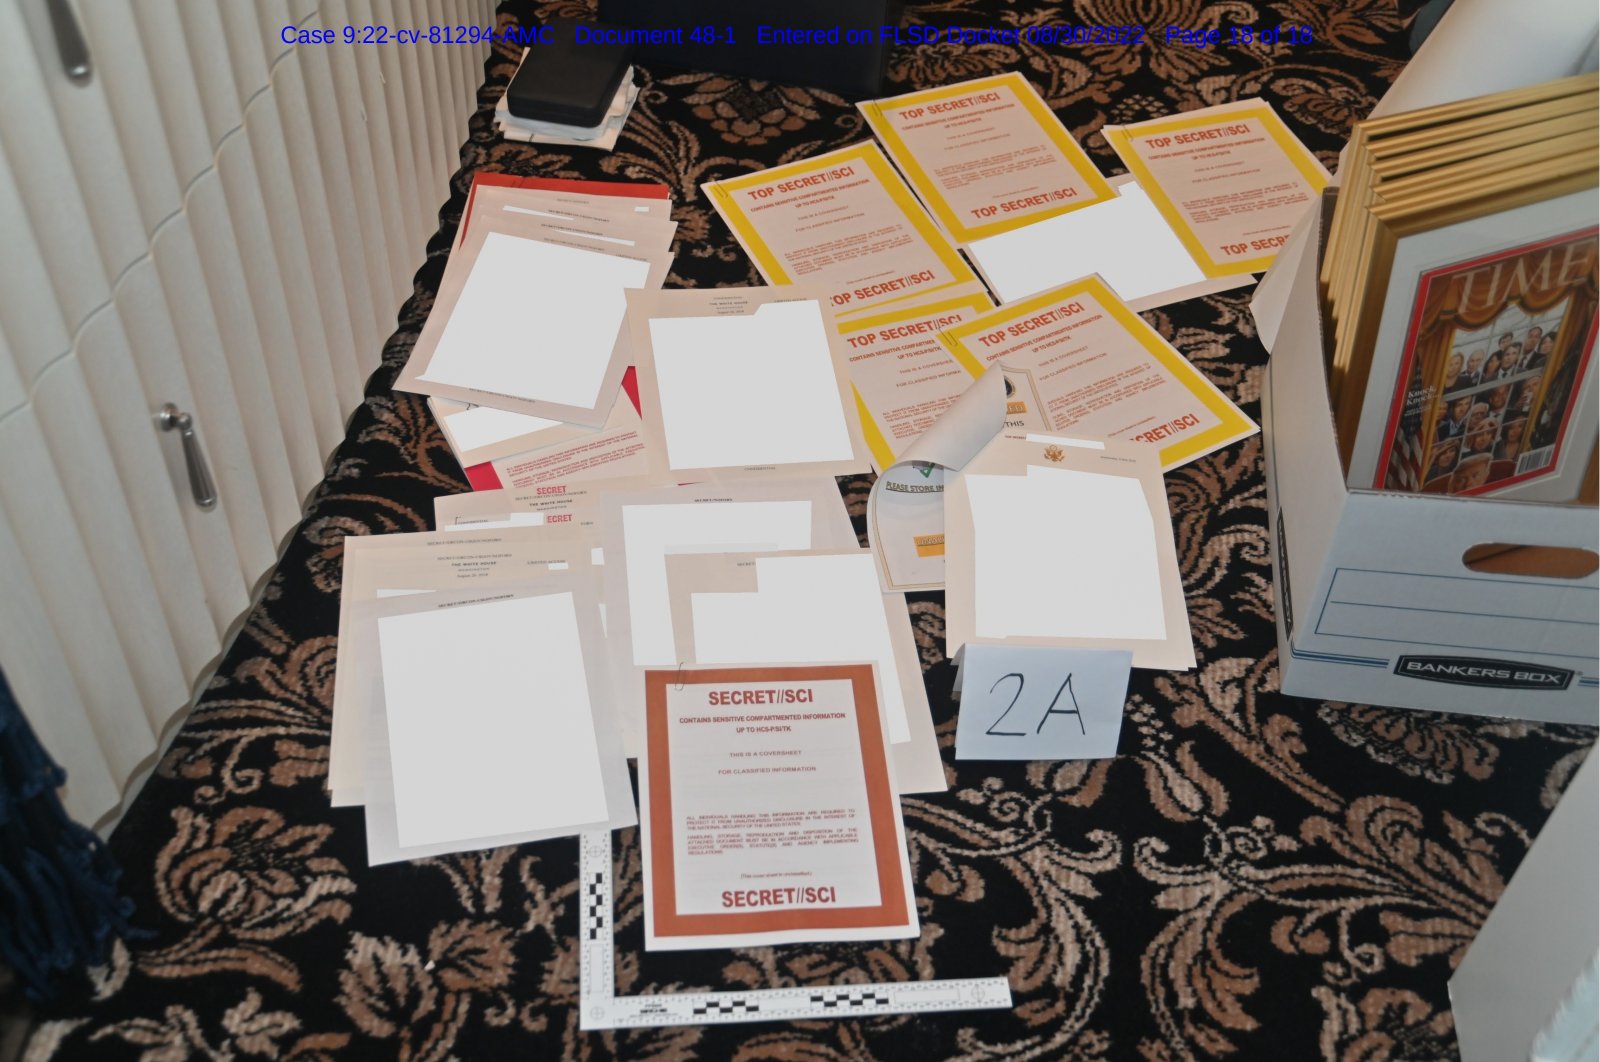 Documents seized during the Aug. 8 search by the FBI of former President Donald Trump&#039;s Mar-a-Lago estate in Florida are seen in this image contained in a court filing by the Department of Justice on Aug. 30, 2022. (Department of Justice via AP)